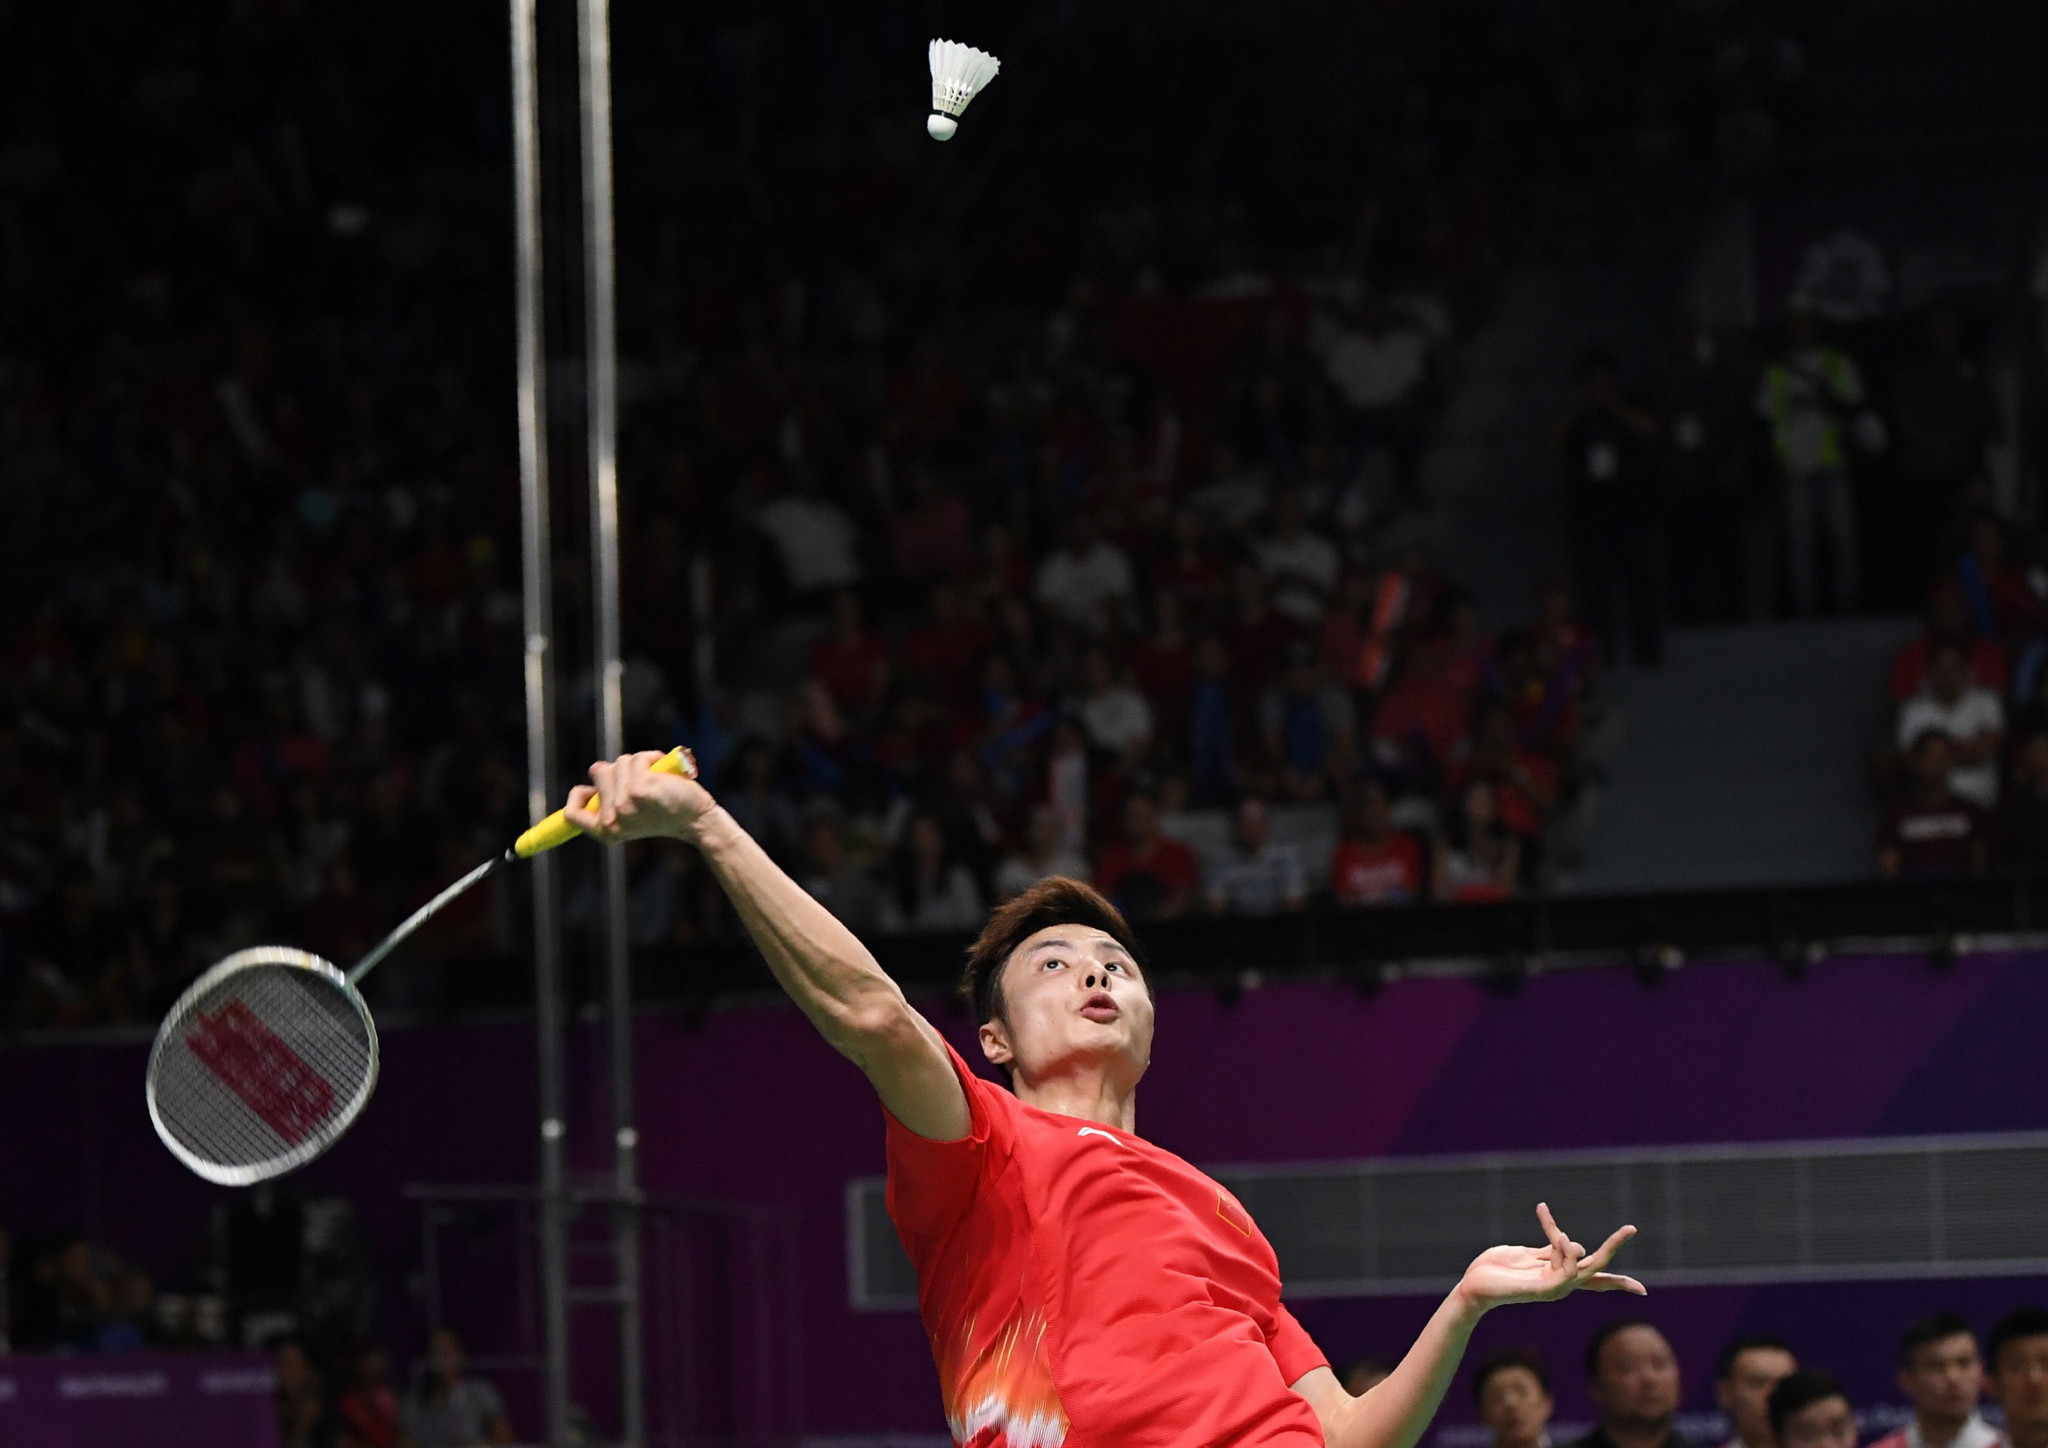 Shi Yuqi also played his part with a hard-fought victory over Anthony Sinisuka Ginting, who pulled out of their singles contest in the latter stages through injury ©Getty Images